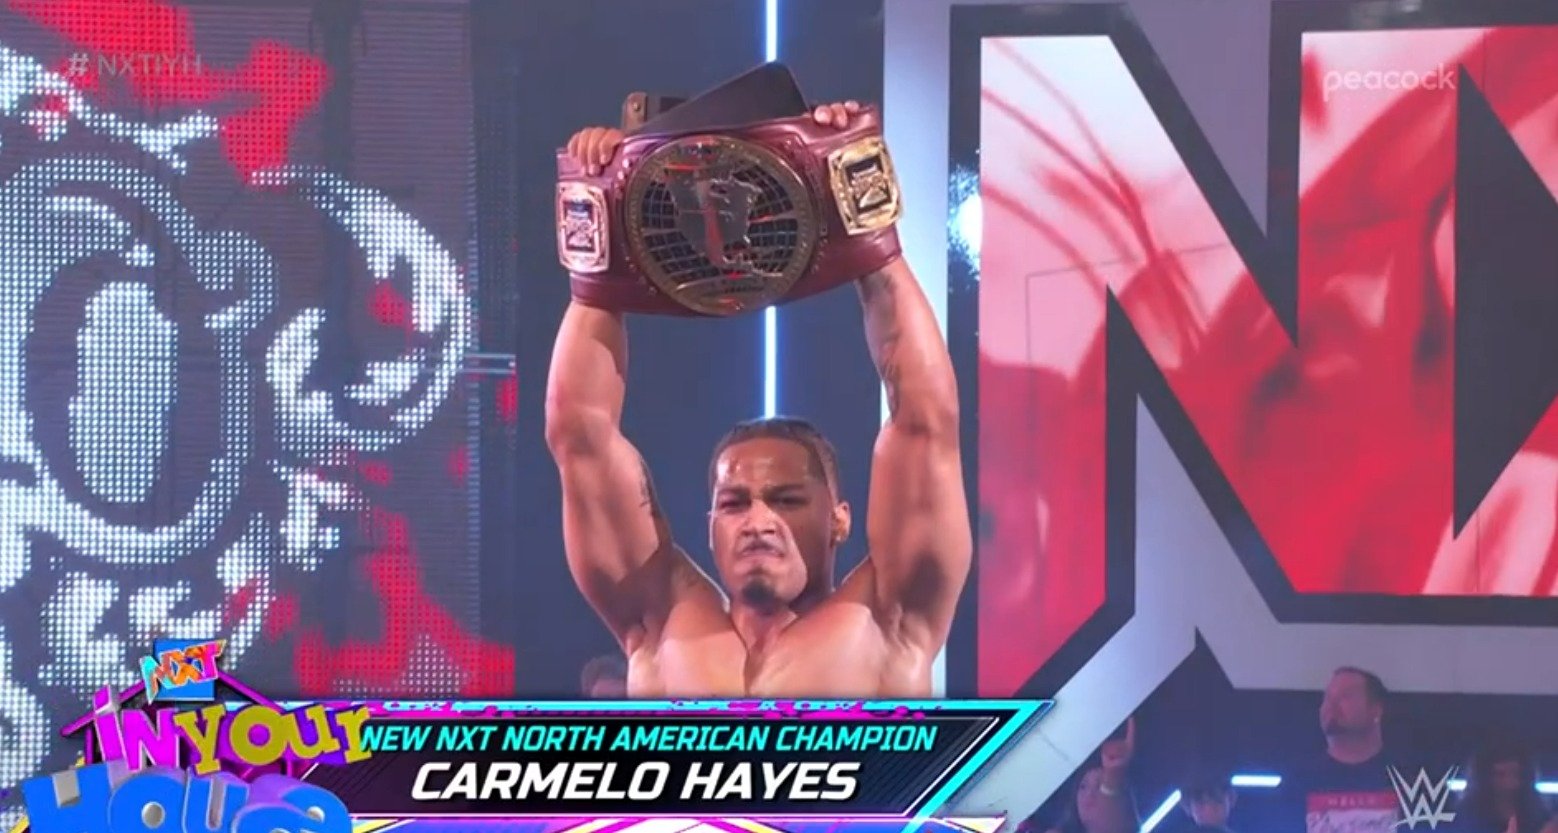 Carmelo Hayes has won the NXT North American Championship